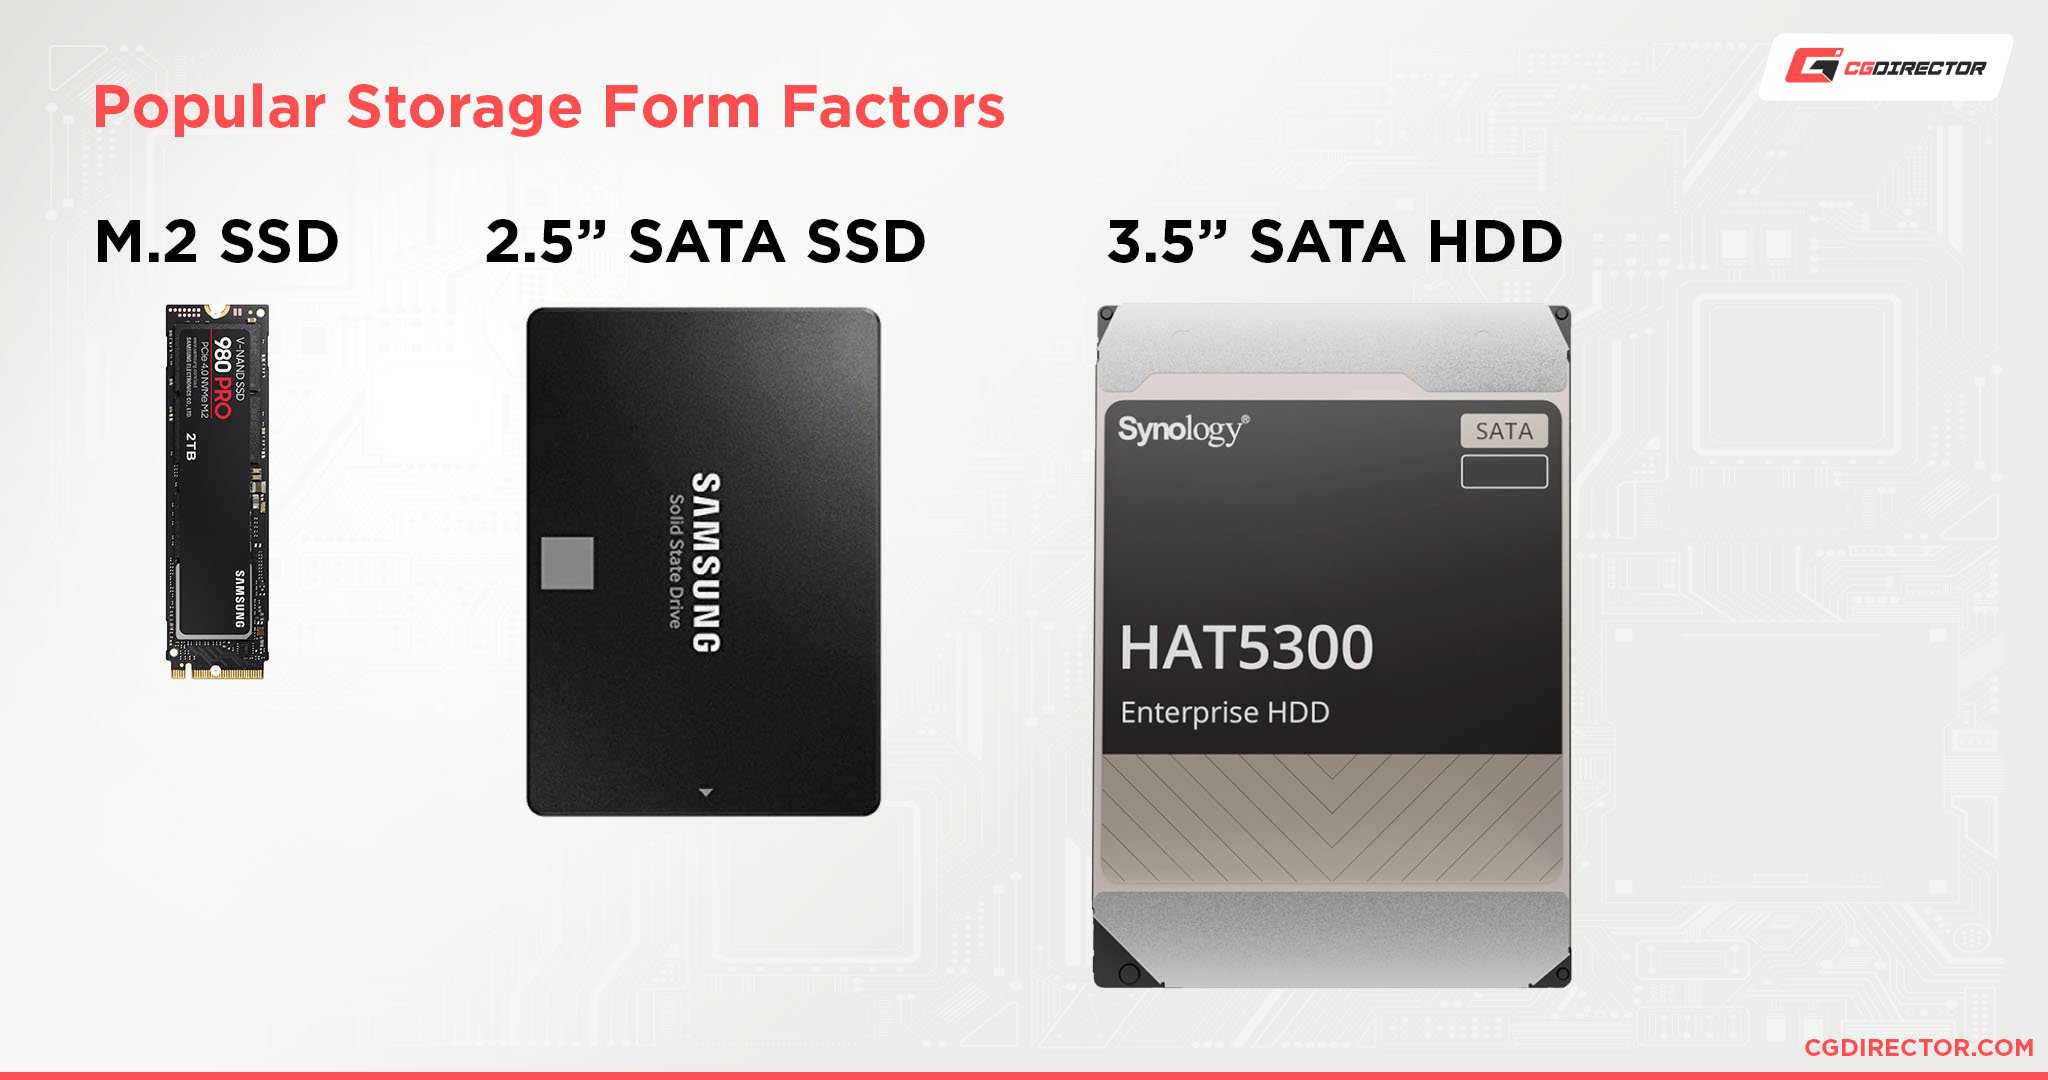 NVMe vs. SATA vs. M.2 SSD Explained: What's the Differences?